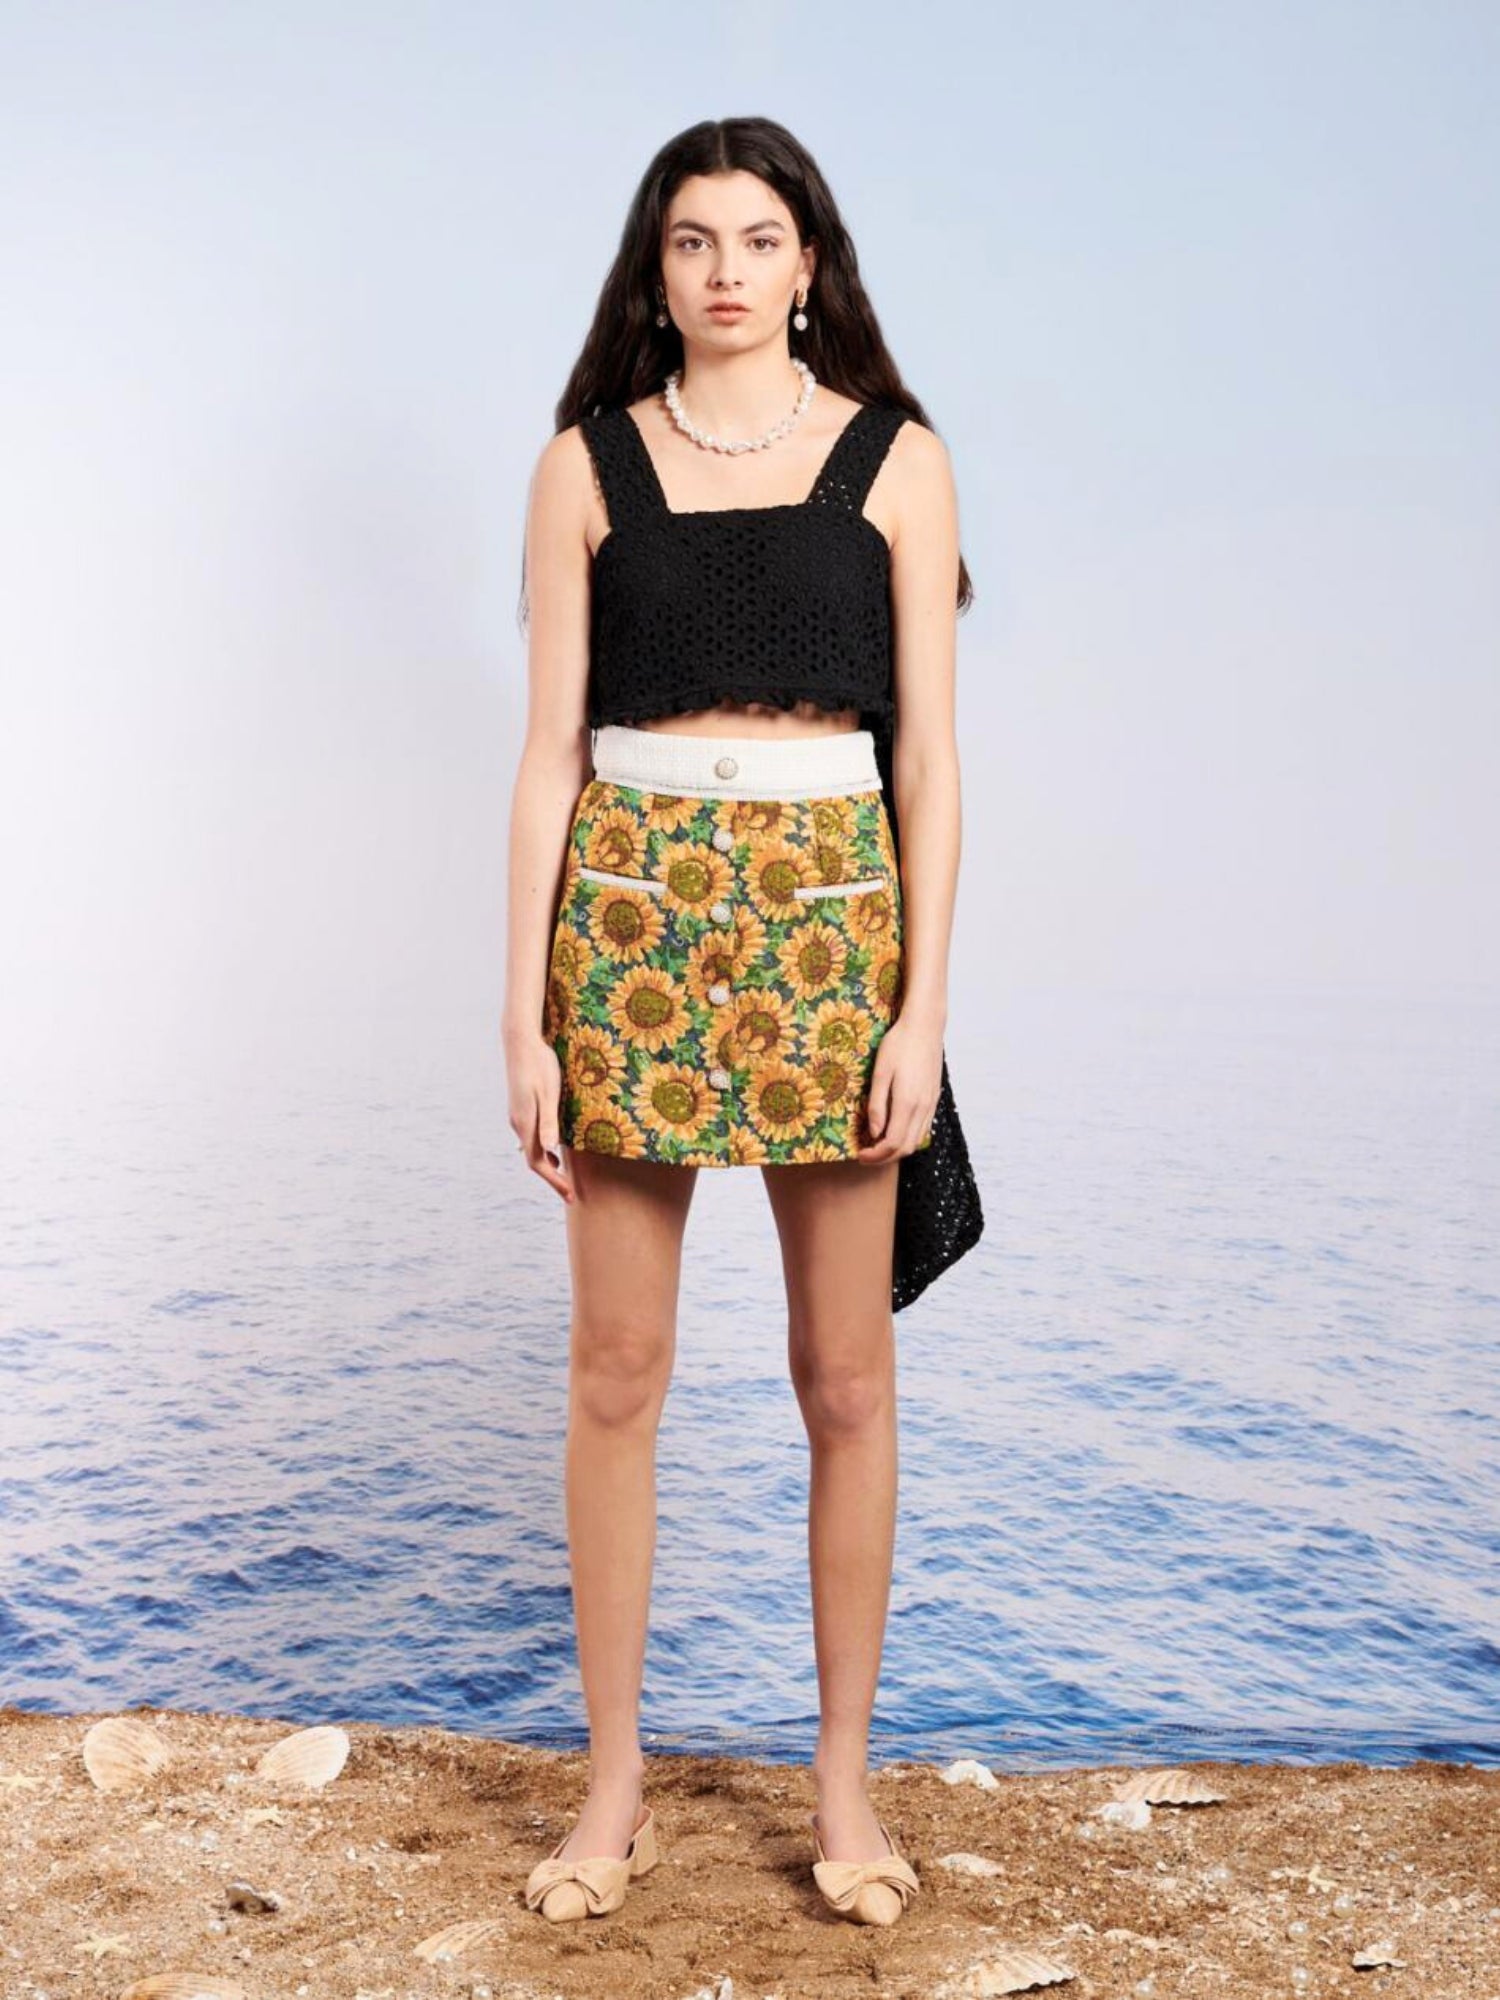 Warm Seas Tweed Mini Skirt - The Warm Seas Tweed Mini Skirt by Sister Jane is designed with a sunflower tapestry fabric. Detailed with a contrast tweed waistband outlined with braid trim. Complete with decorative stand out pearl buttons. - Ivory Sheep Col